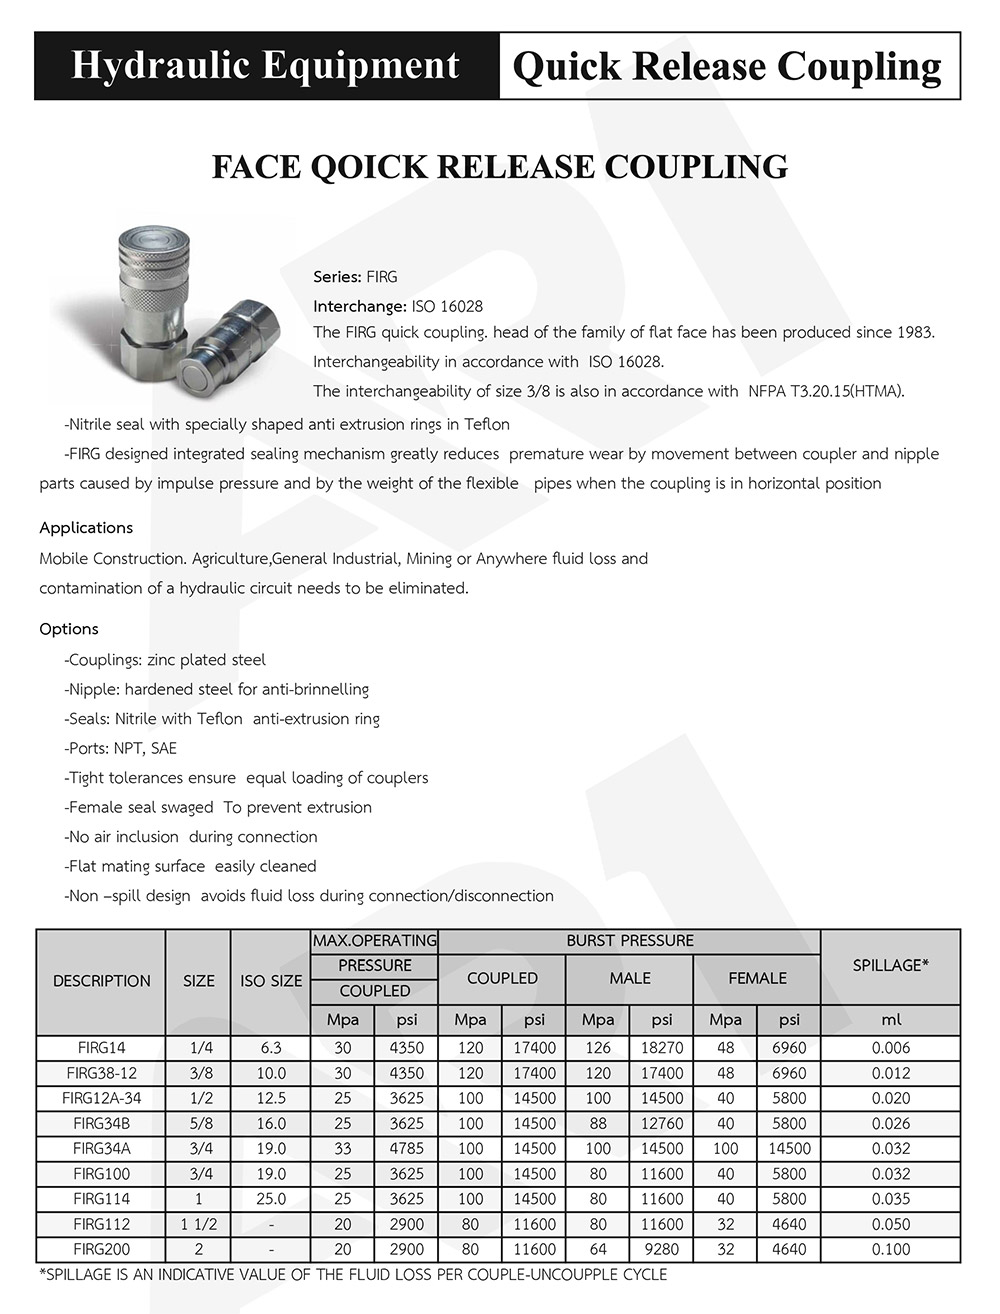 Face Quick Release Coupling